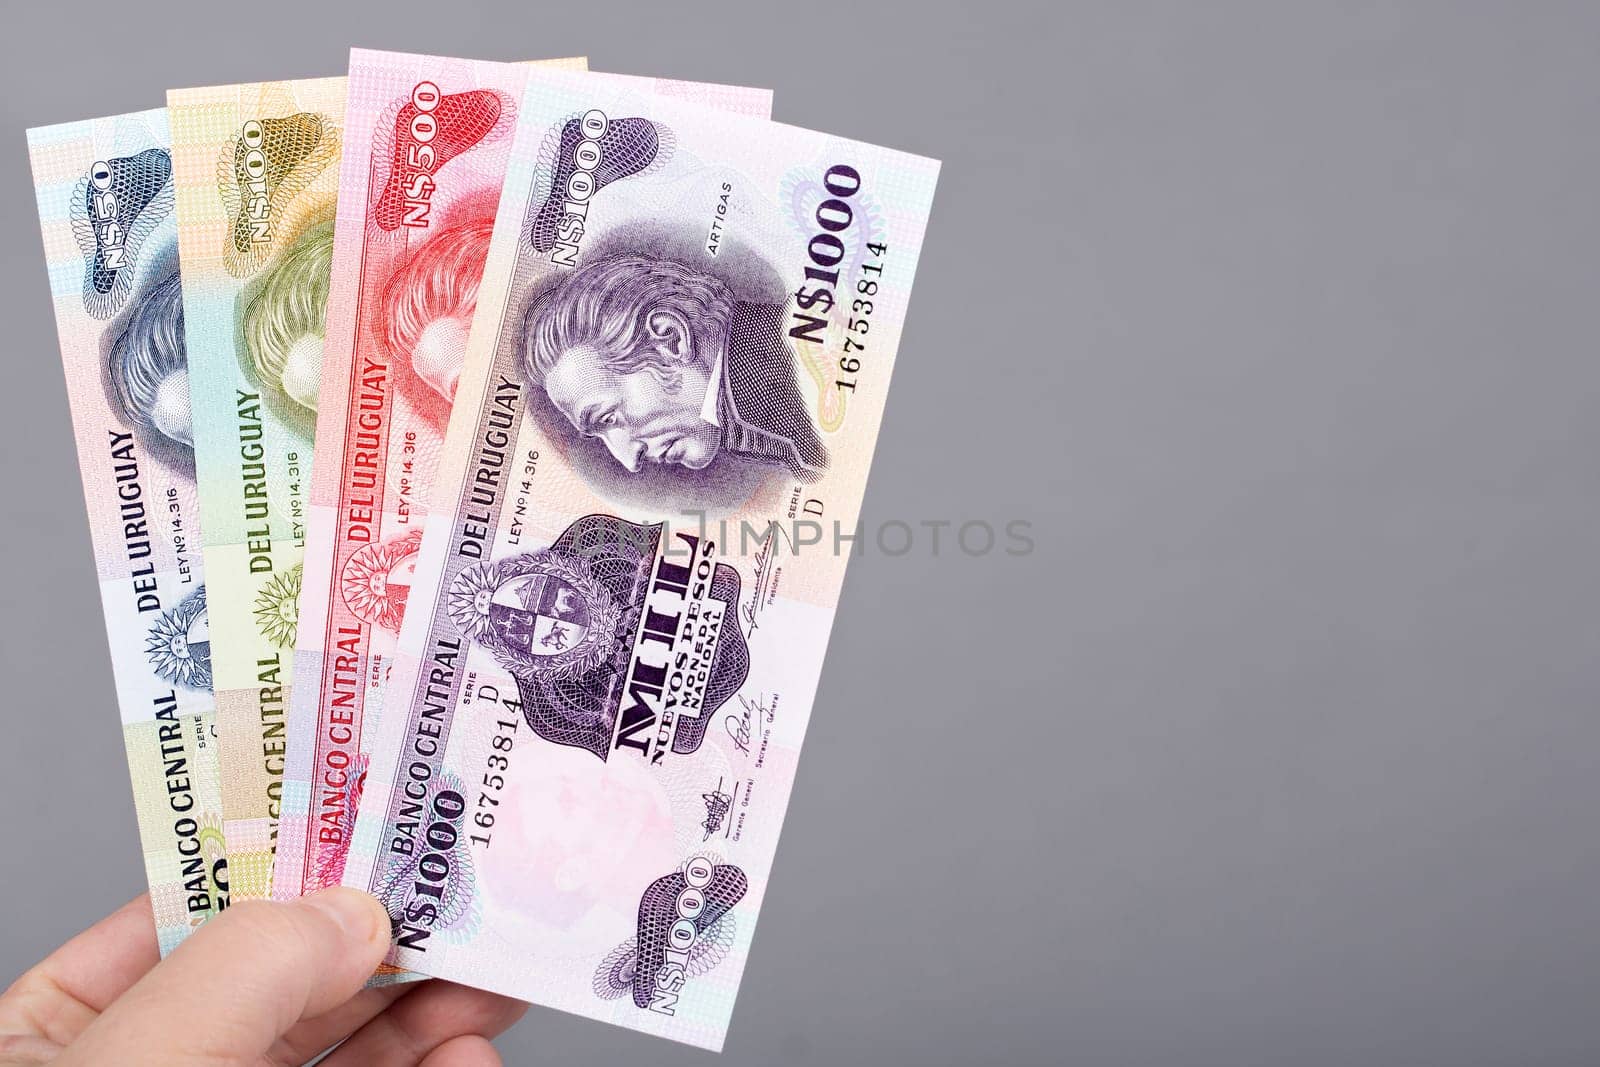 Uruguayan pesos  in the hand on a gray background by johan10